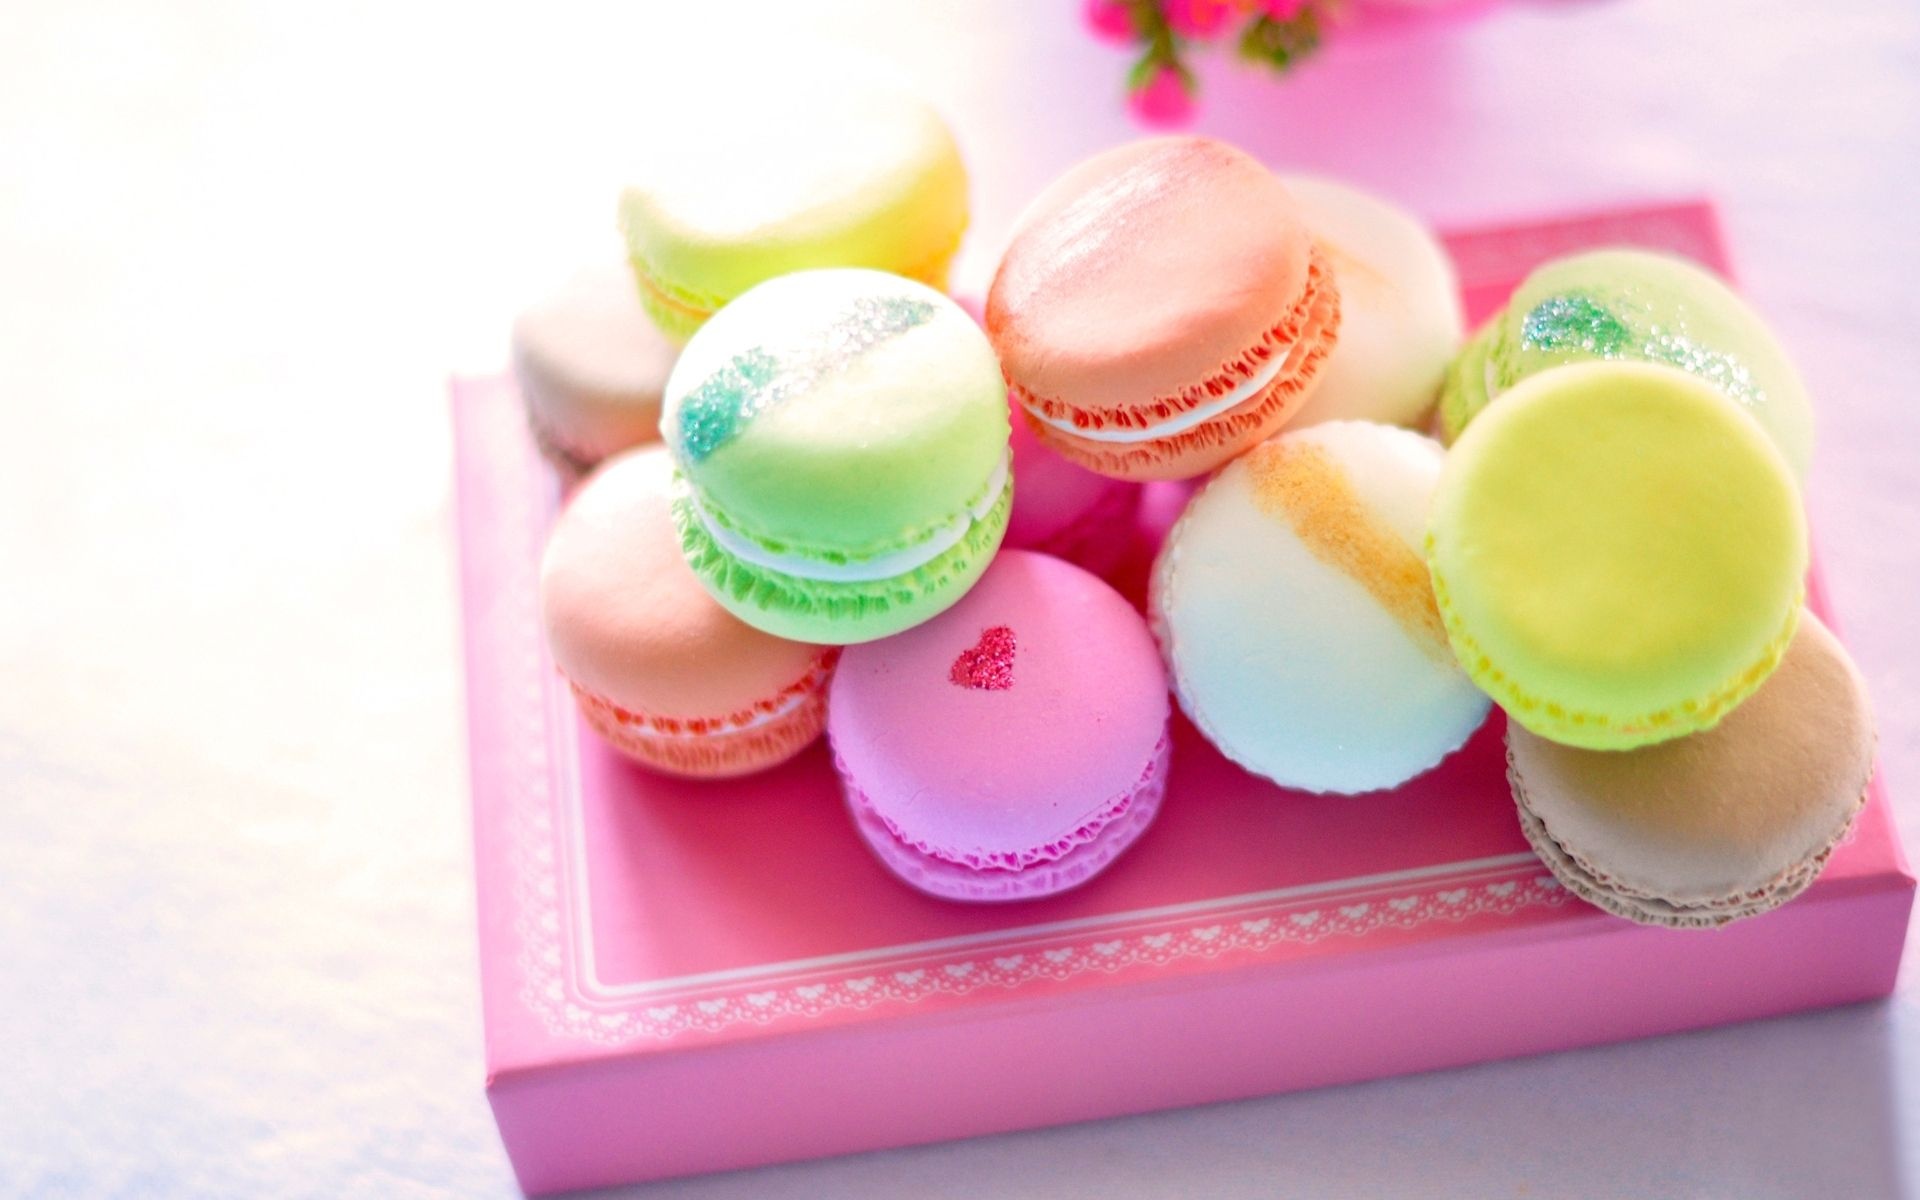 Macaron: One of the most famous French exports to the confectionary world. 1920x1200 HD Wallpaper.